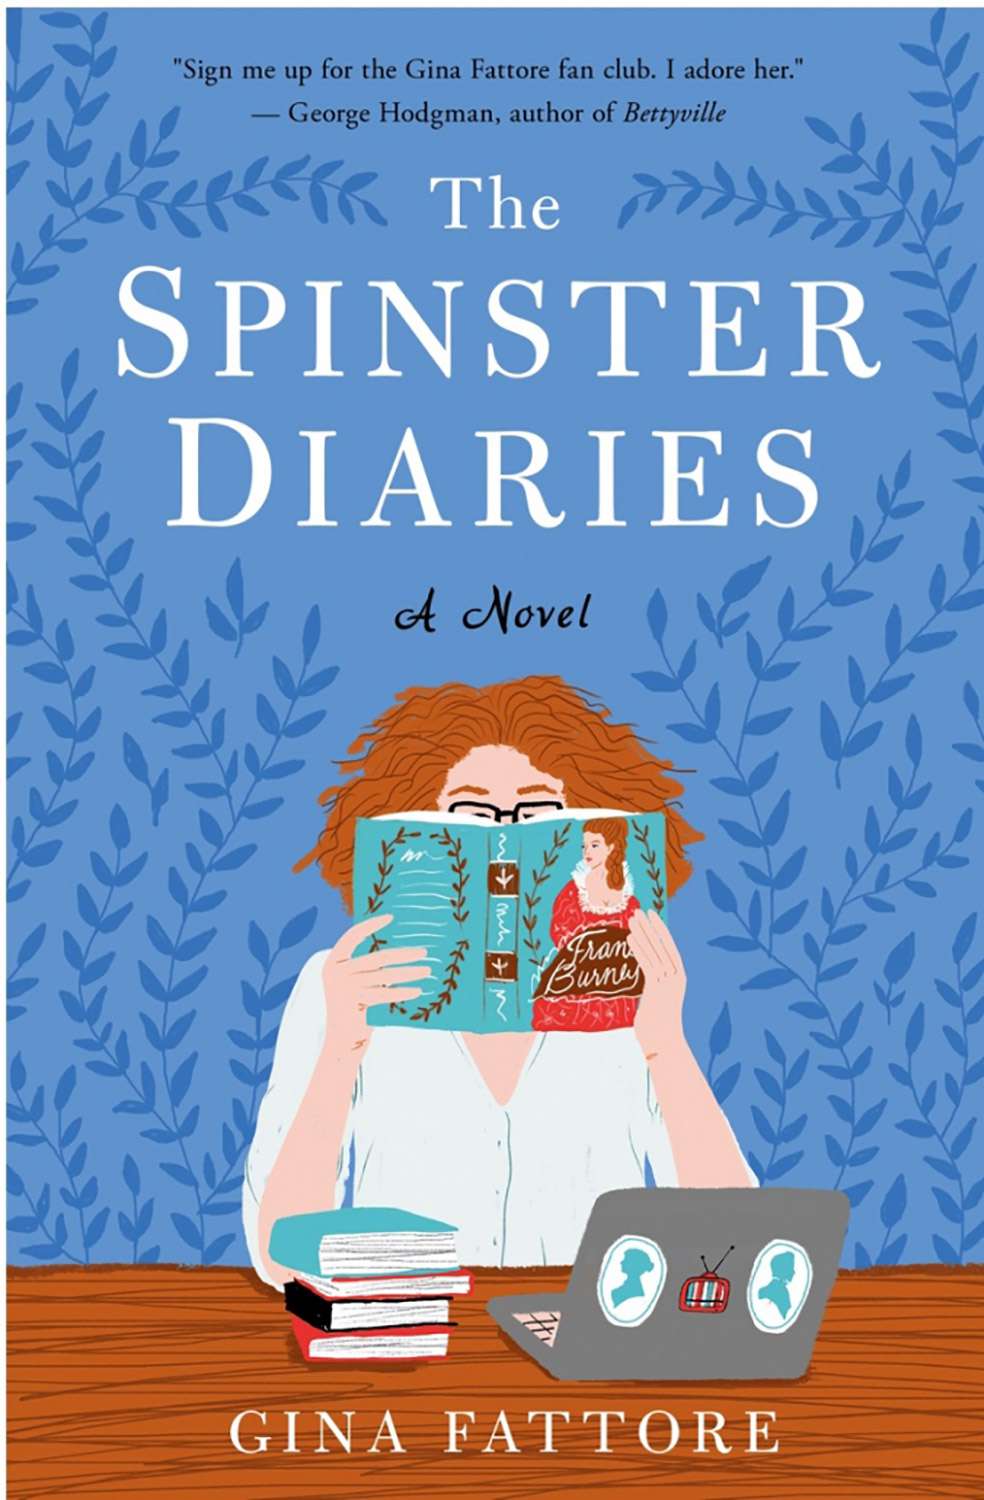 The Spinster Diaries